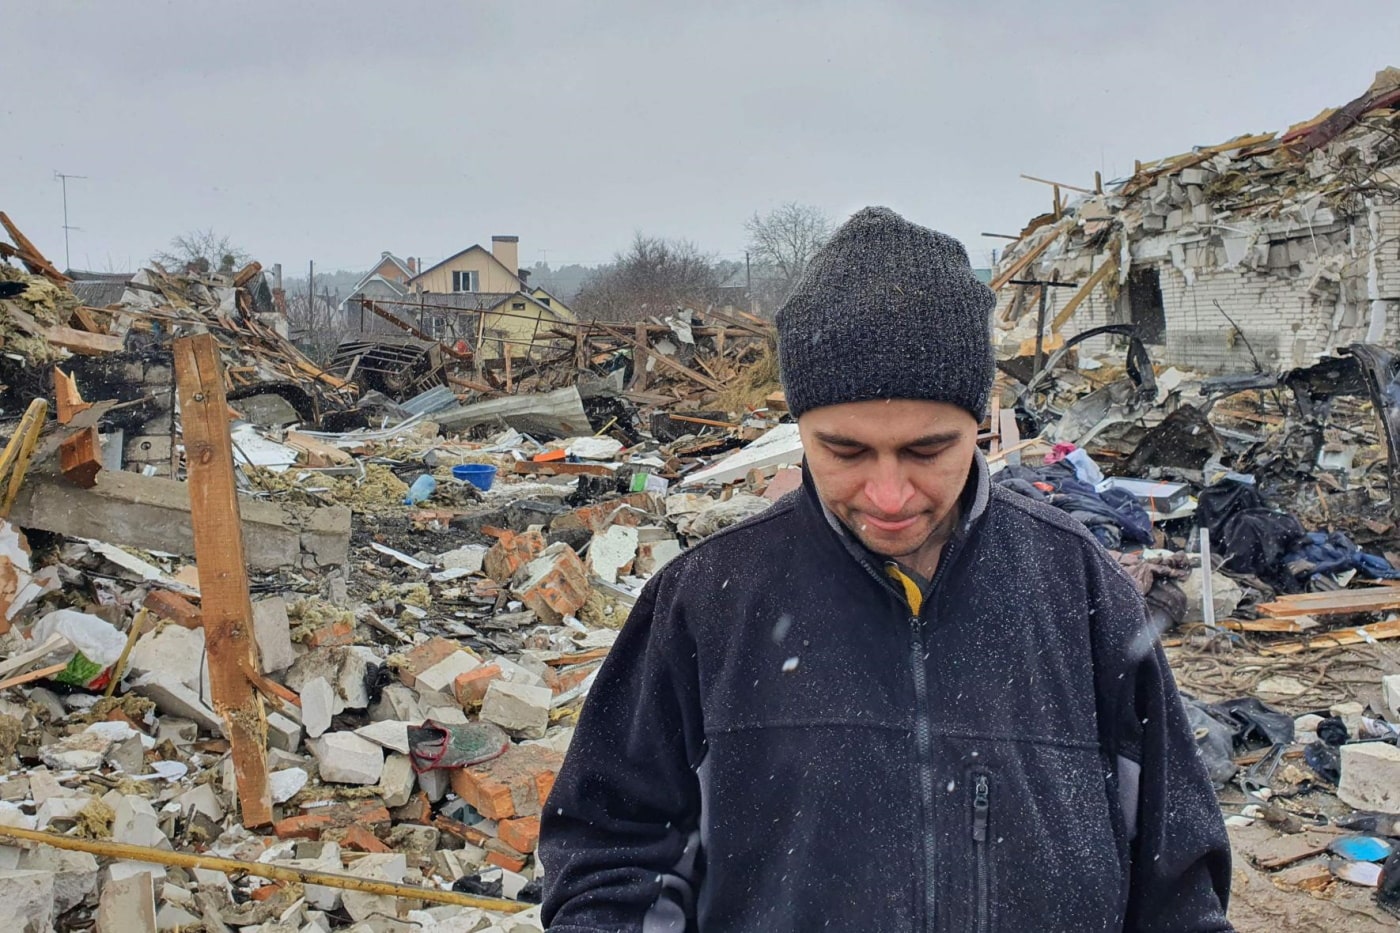 Oleg Rubak, 32, an engineer who lost his wife Katia, 29, in the shelling, stands on the rubble of his house in Zhytomyr, getty Images